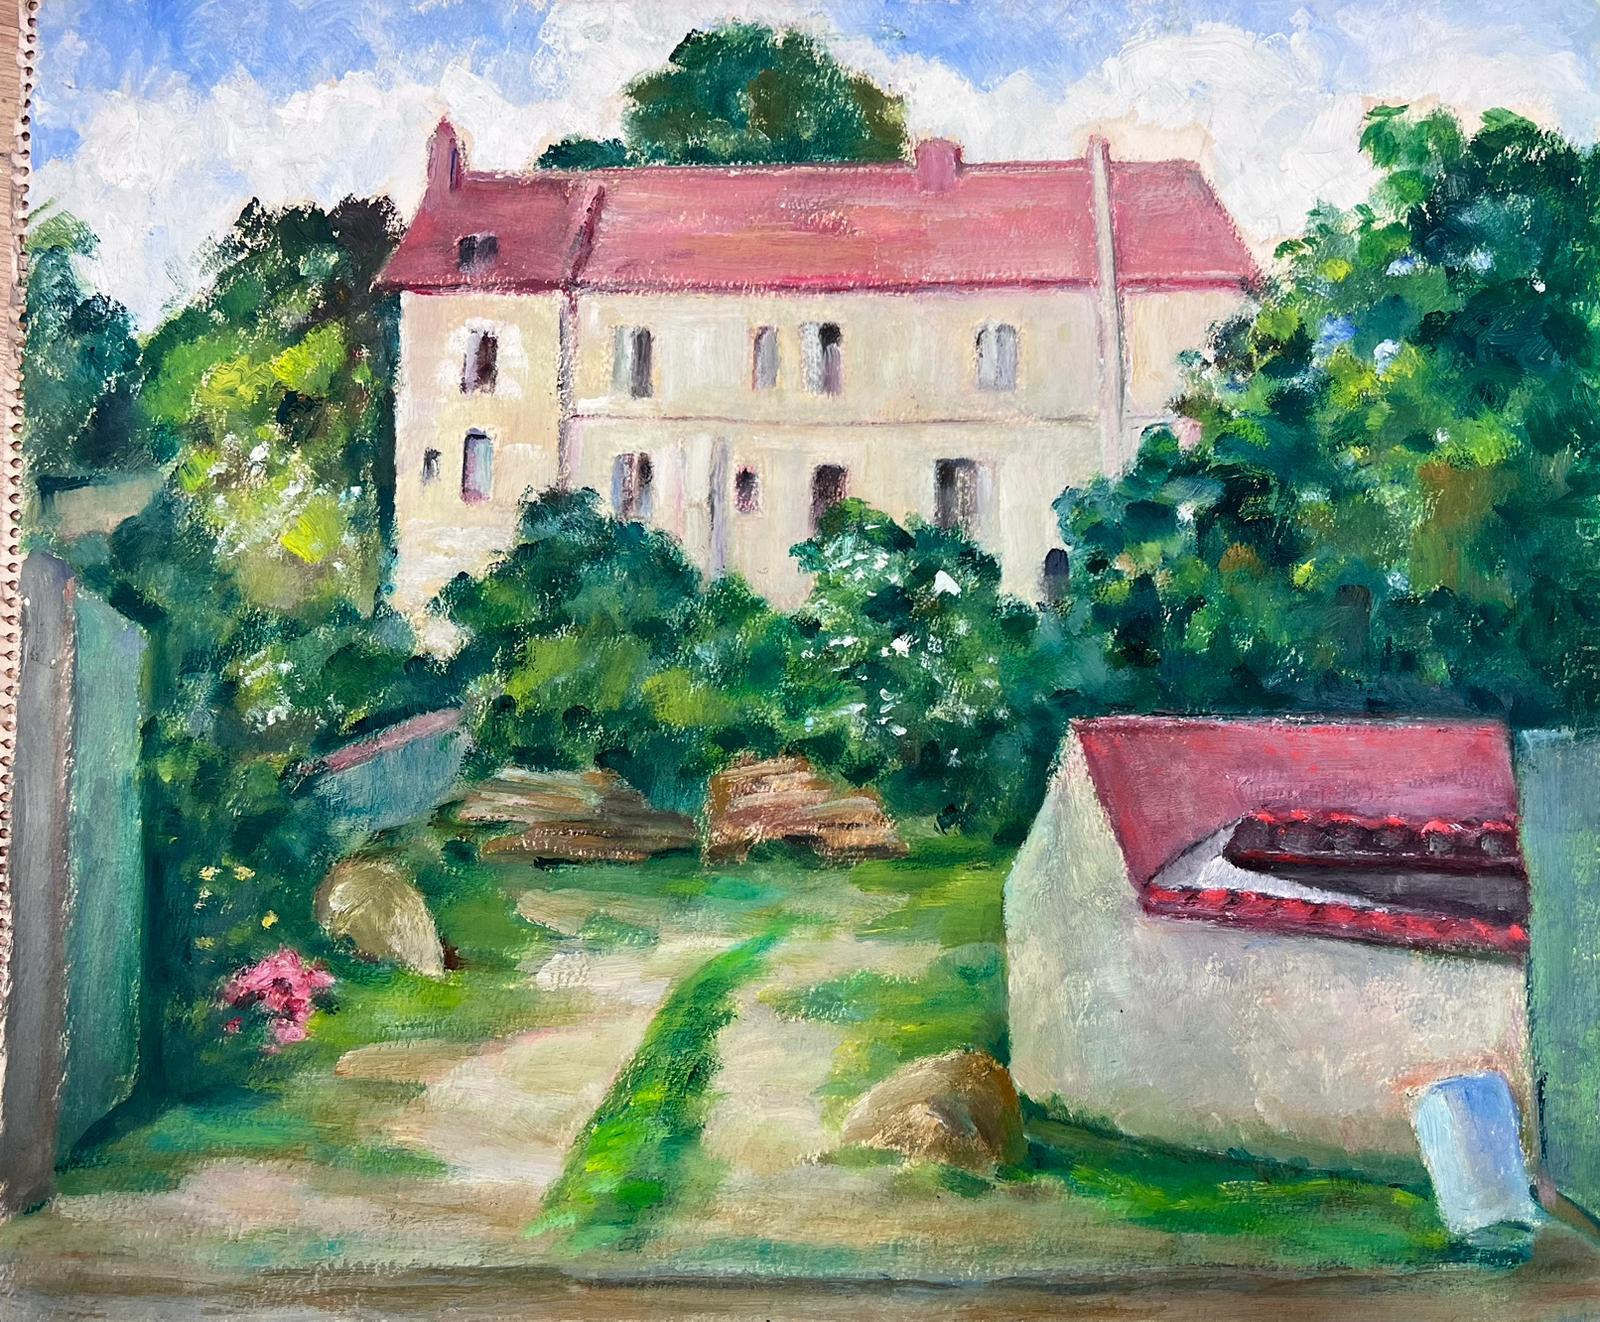 Red Roof House
by Louise Alix (French, 1888-1980) *see notes below
provenance stamp to the back 
gouache painting on artist paper, unframed
measures: 15 high by 18 inches wide
condition: overall very good and sound, a few scuffs and marks to the